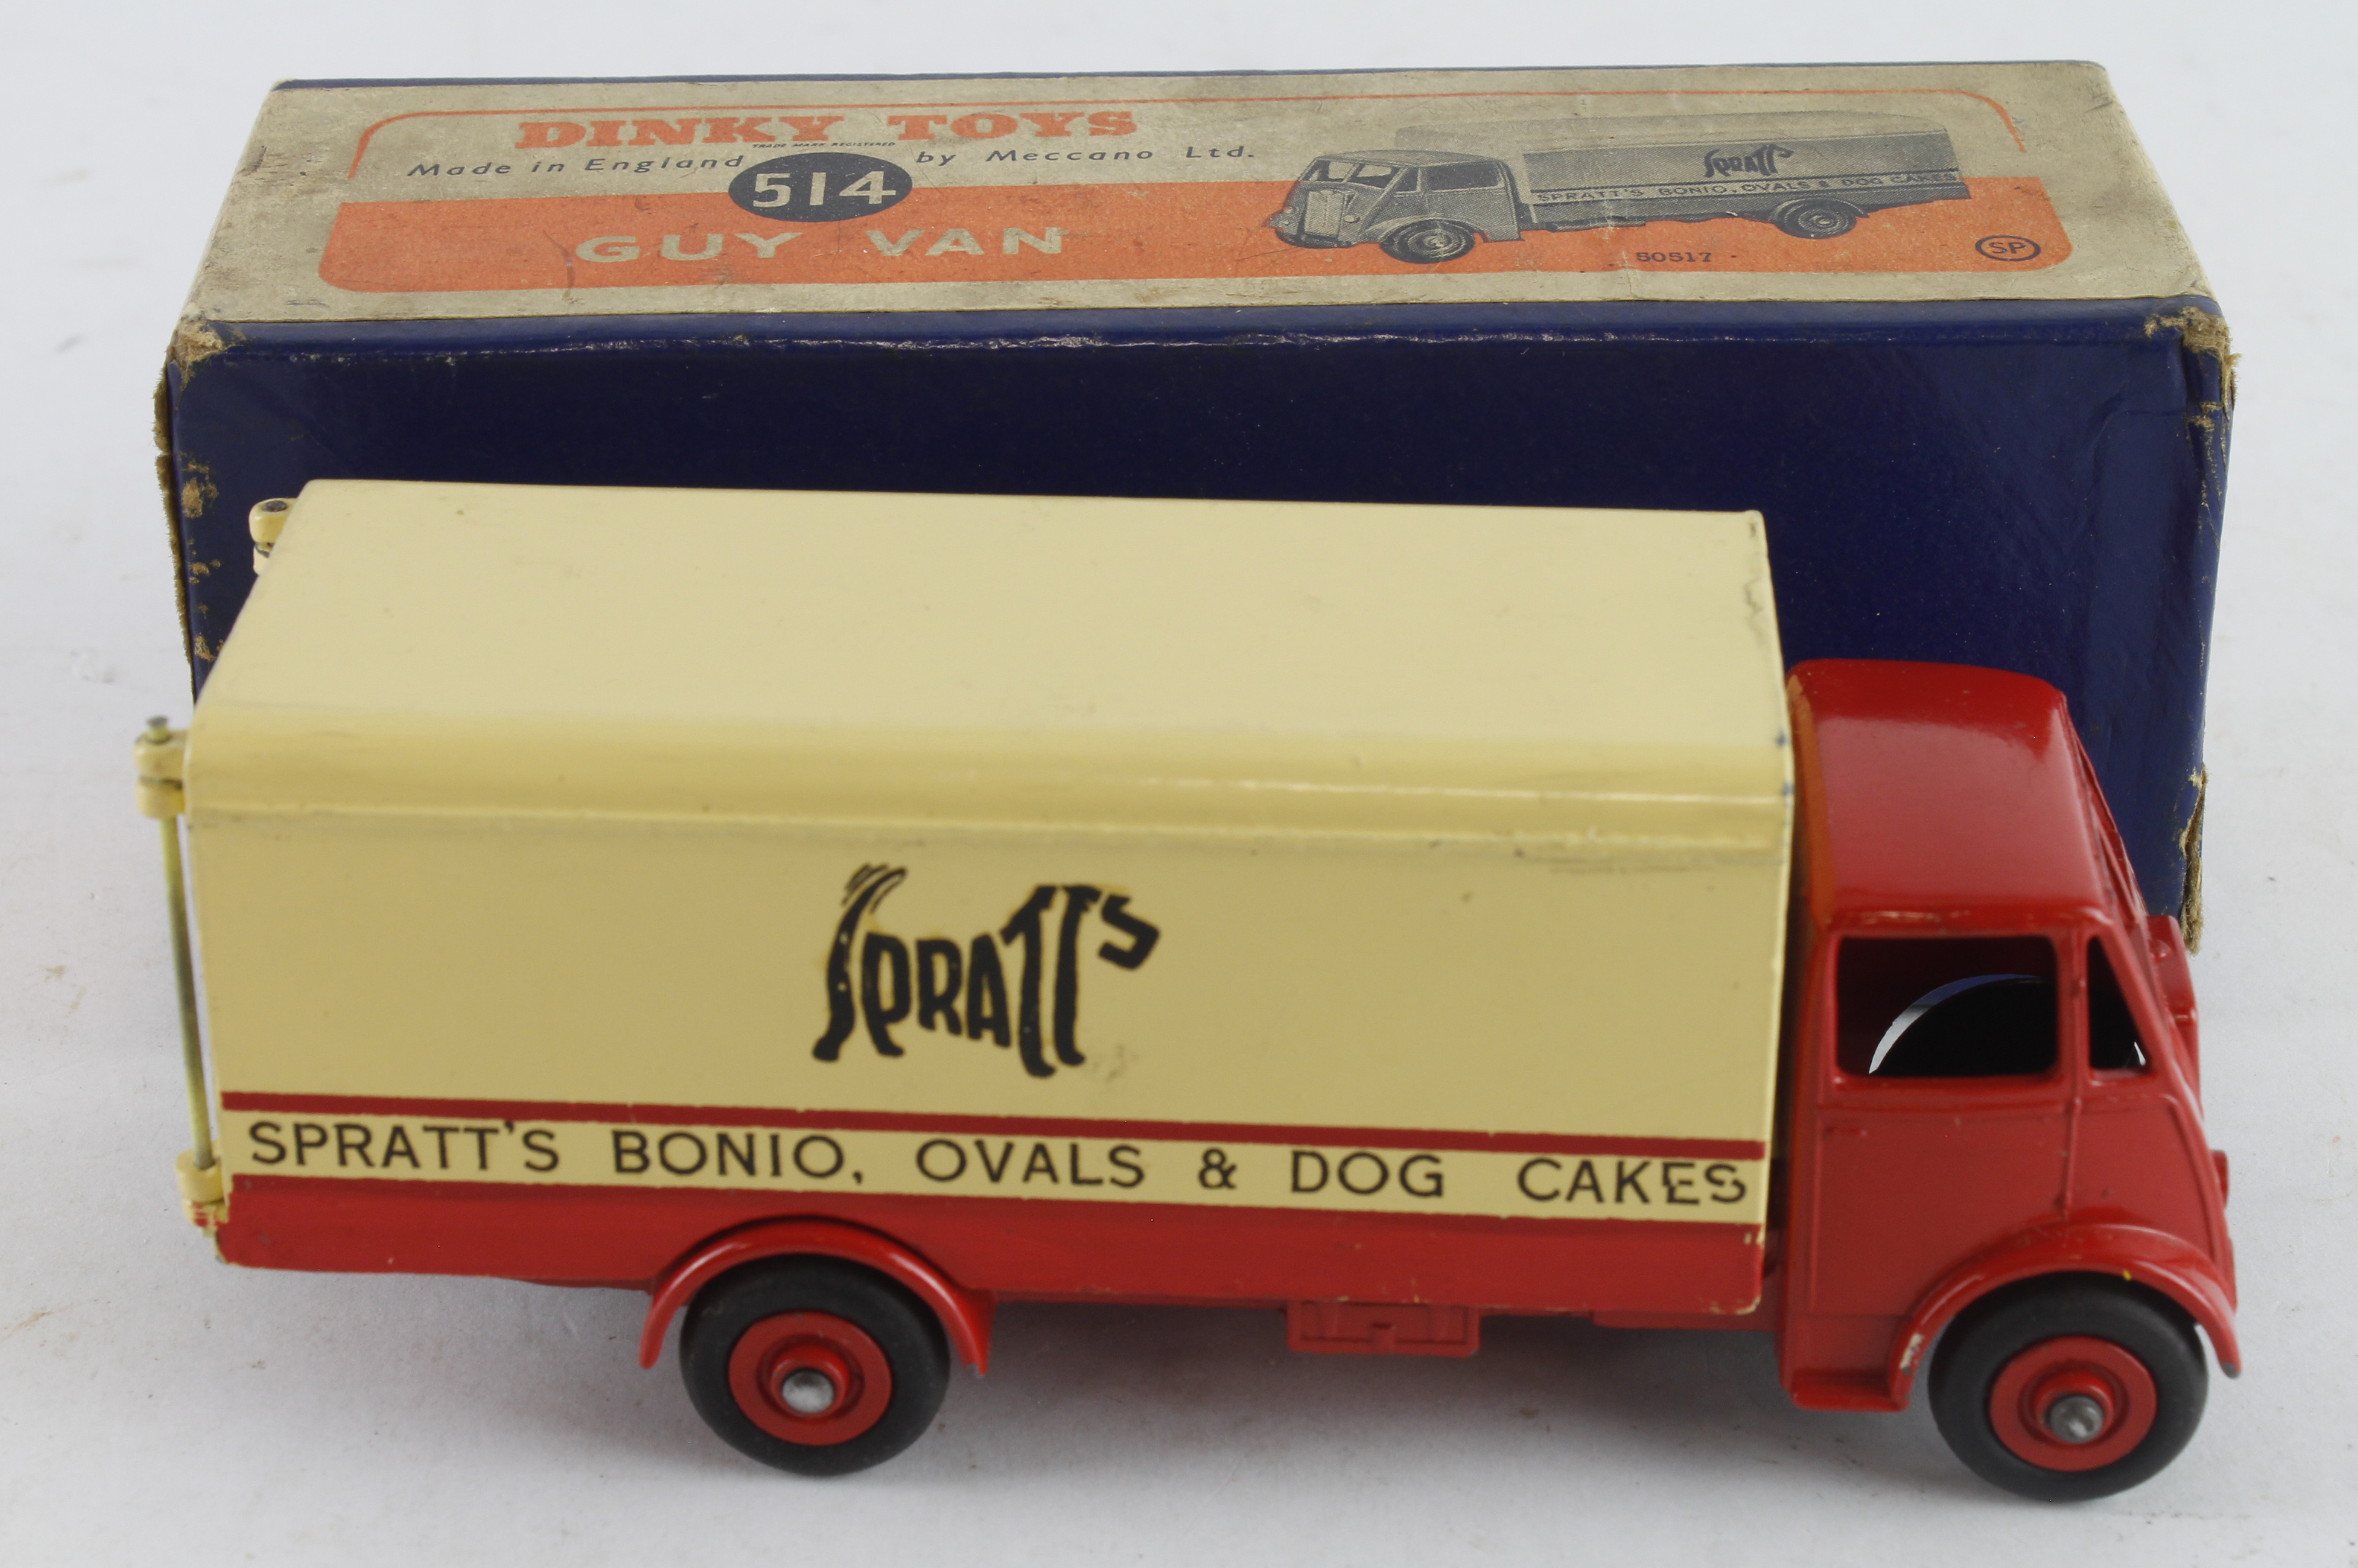 Dinky Toys, no. 514 'Guy Van, Spratts', contained in original box